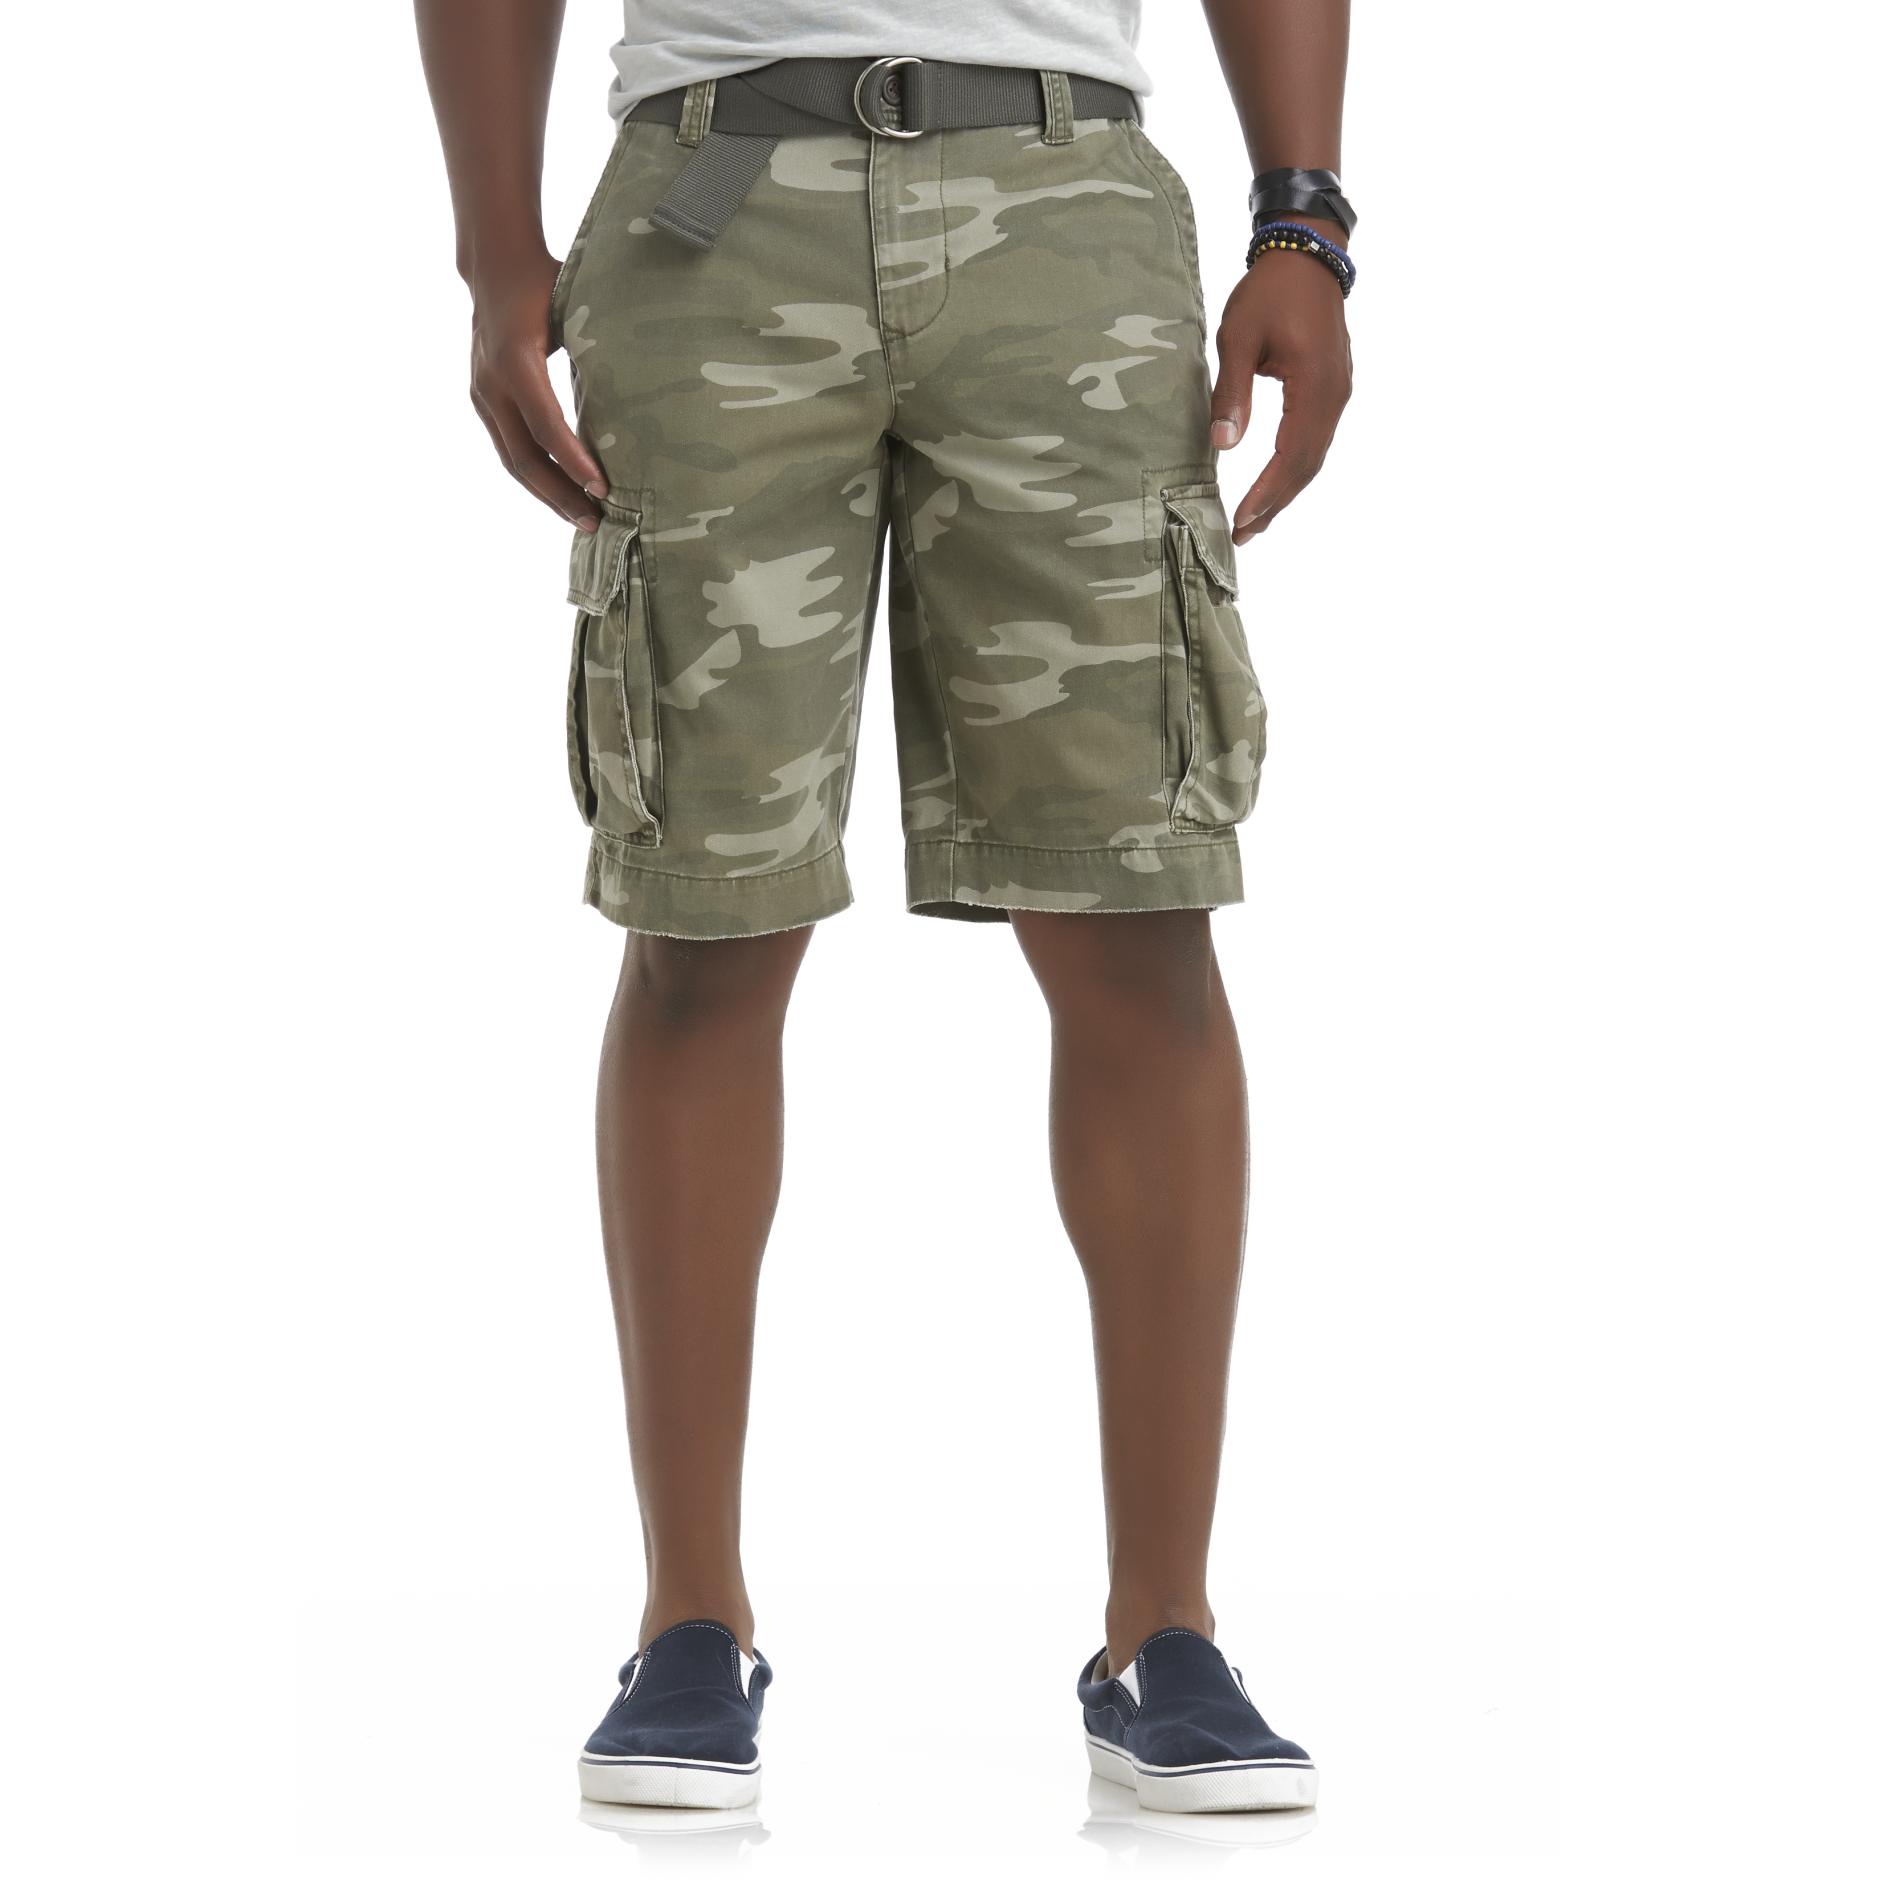 Young Men's Cargo Shorts & Belt - Camouflage